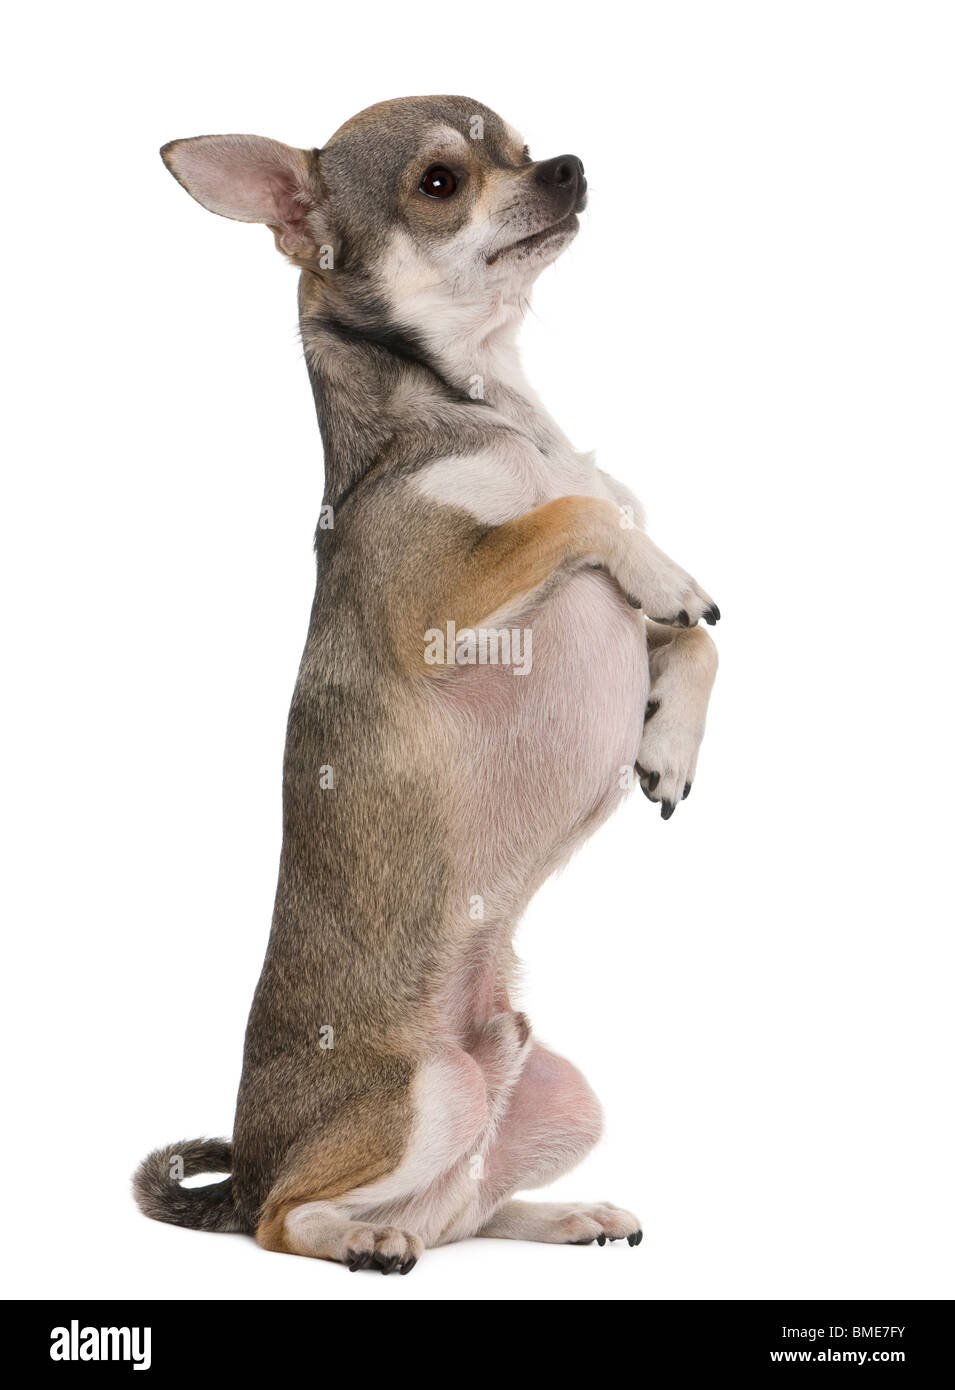 Chihuahua, 3 years old, on hind legs, in front of white background Stock Photo